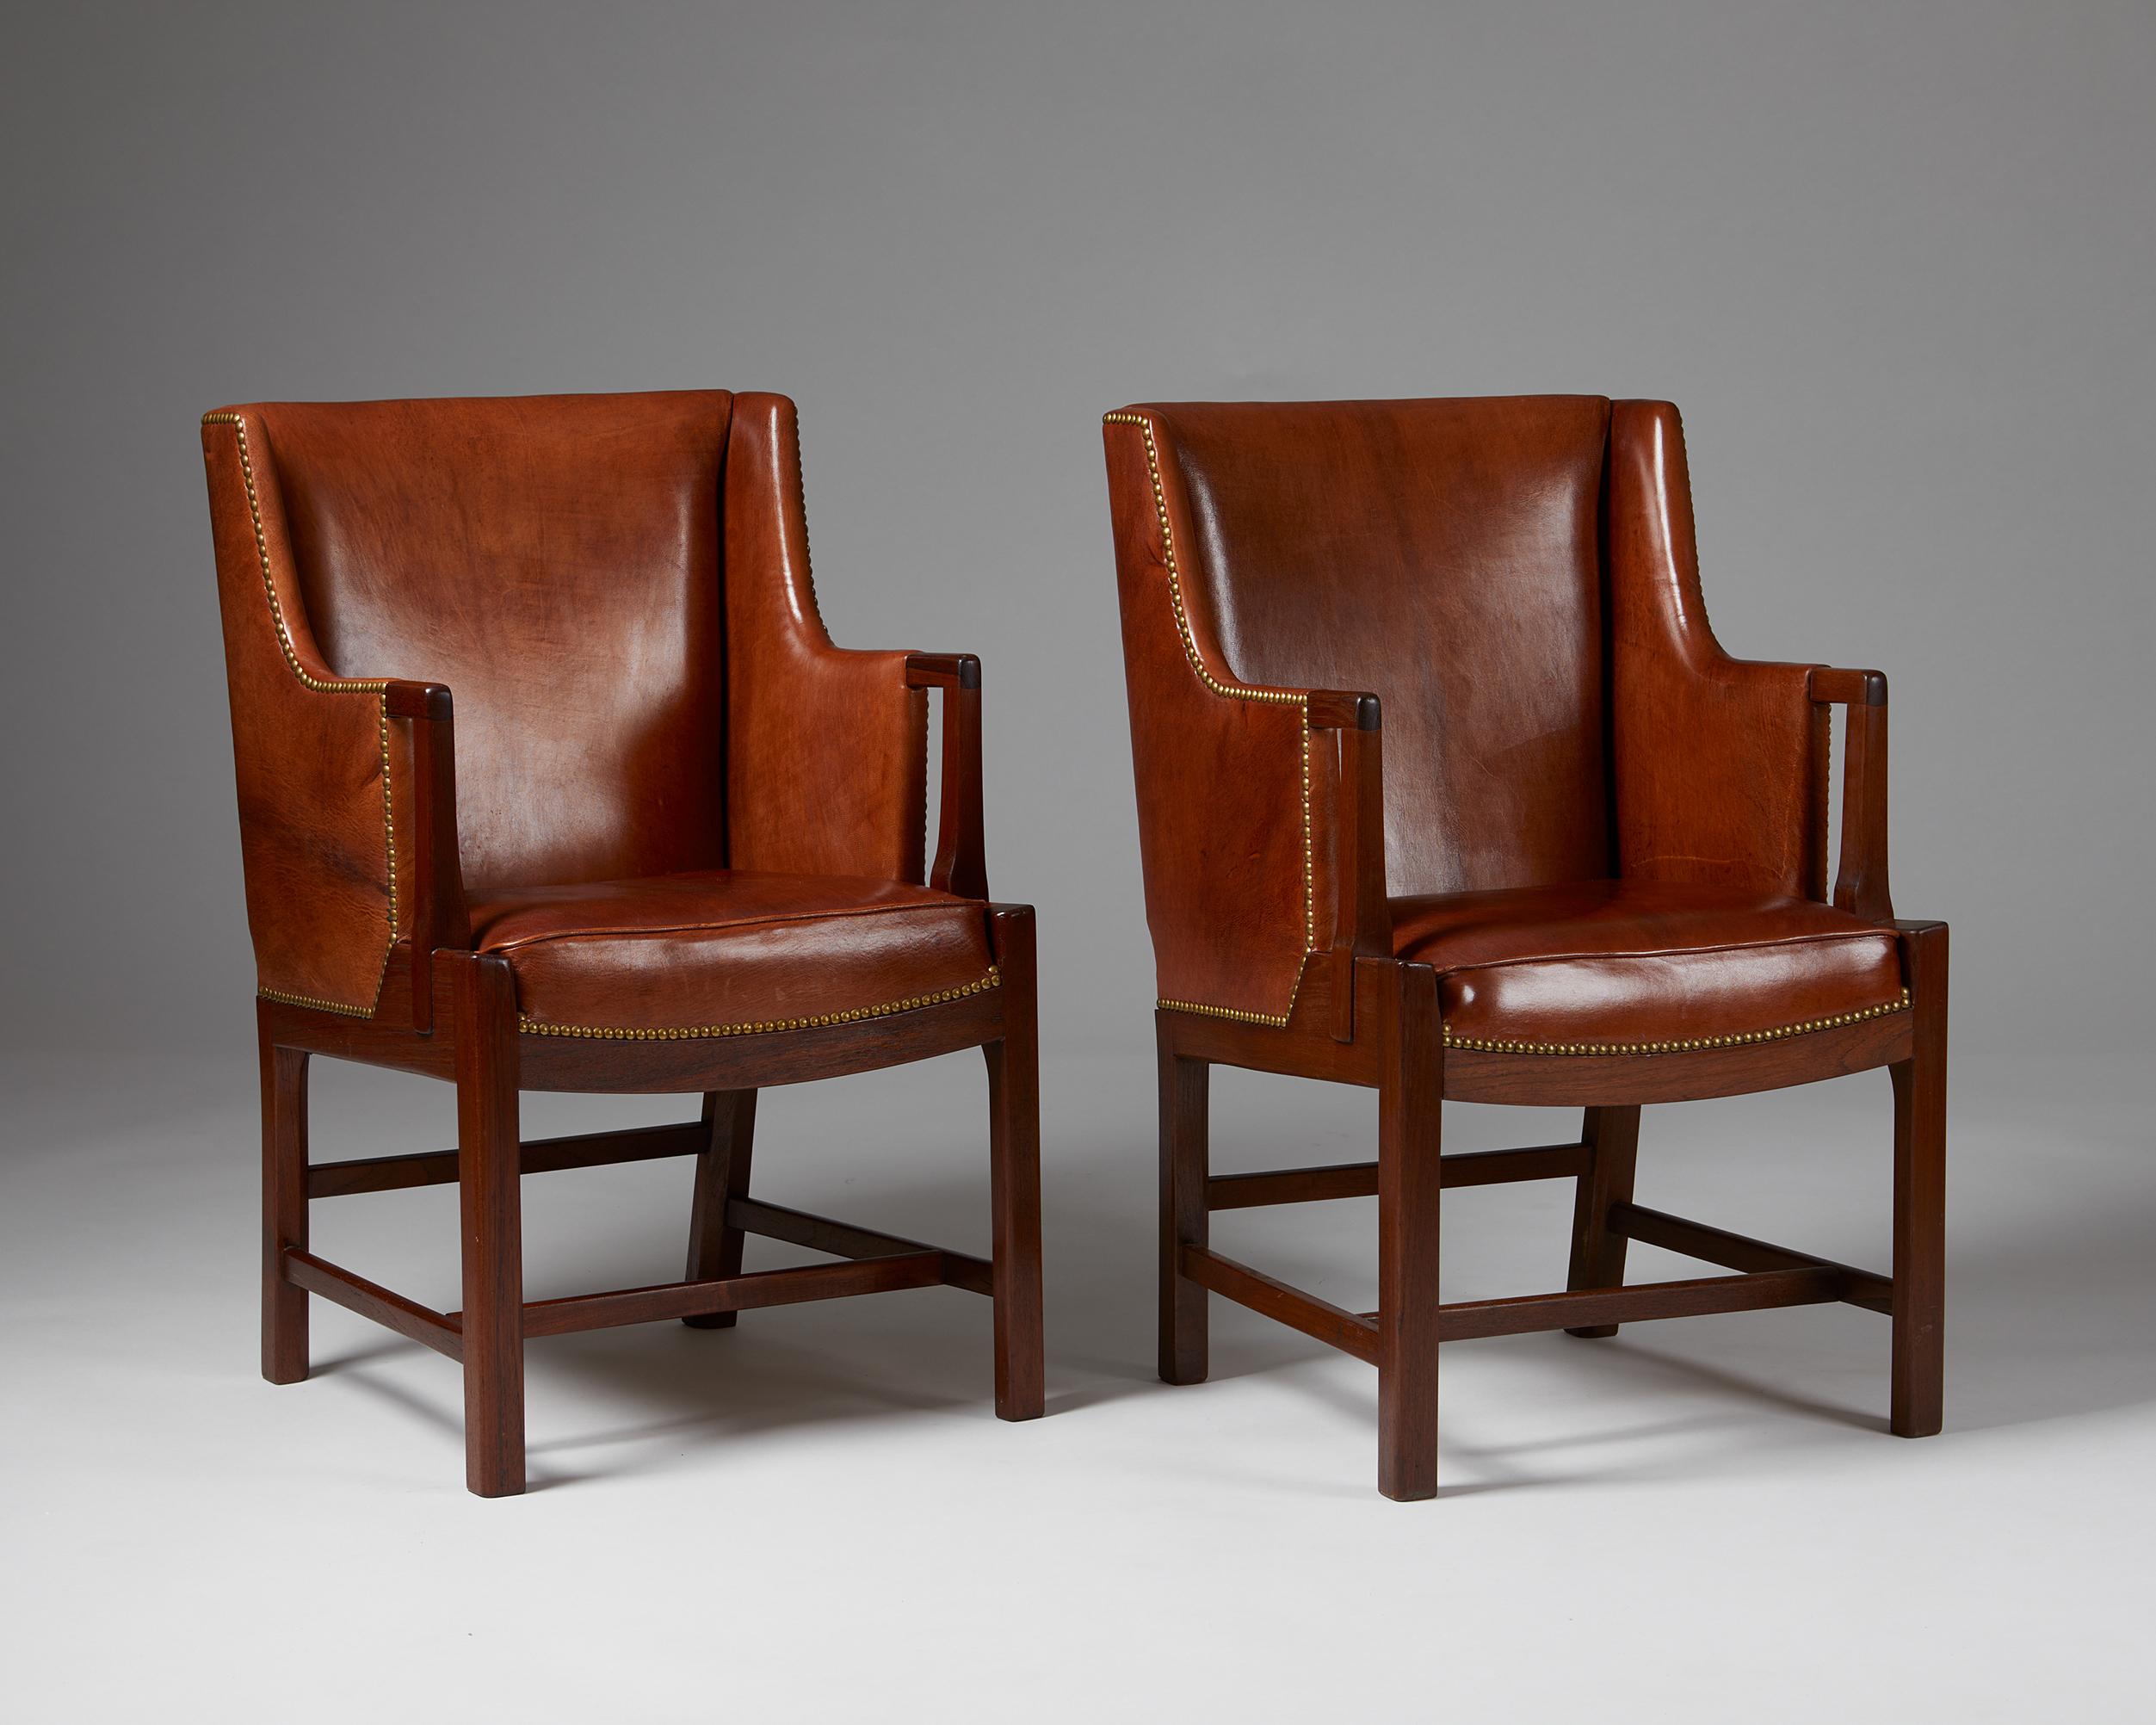 Pair of armchairs designed by Hans J. Wegner and Palle Suenson for C.B. Hansens Etablissement,
Denmark. 1940s.
Mahogany, Niger leather and brass.

This chair model from the 1940s was collaboratively realised by two of Denmark’s most influential